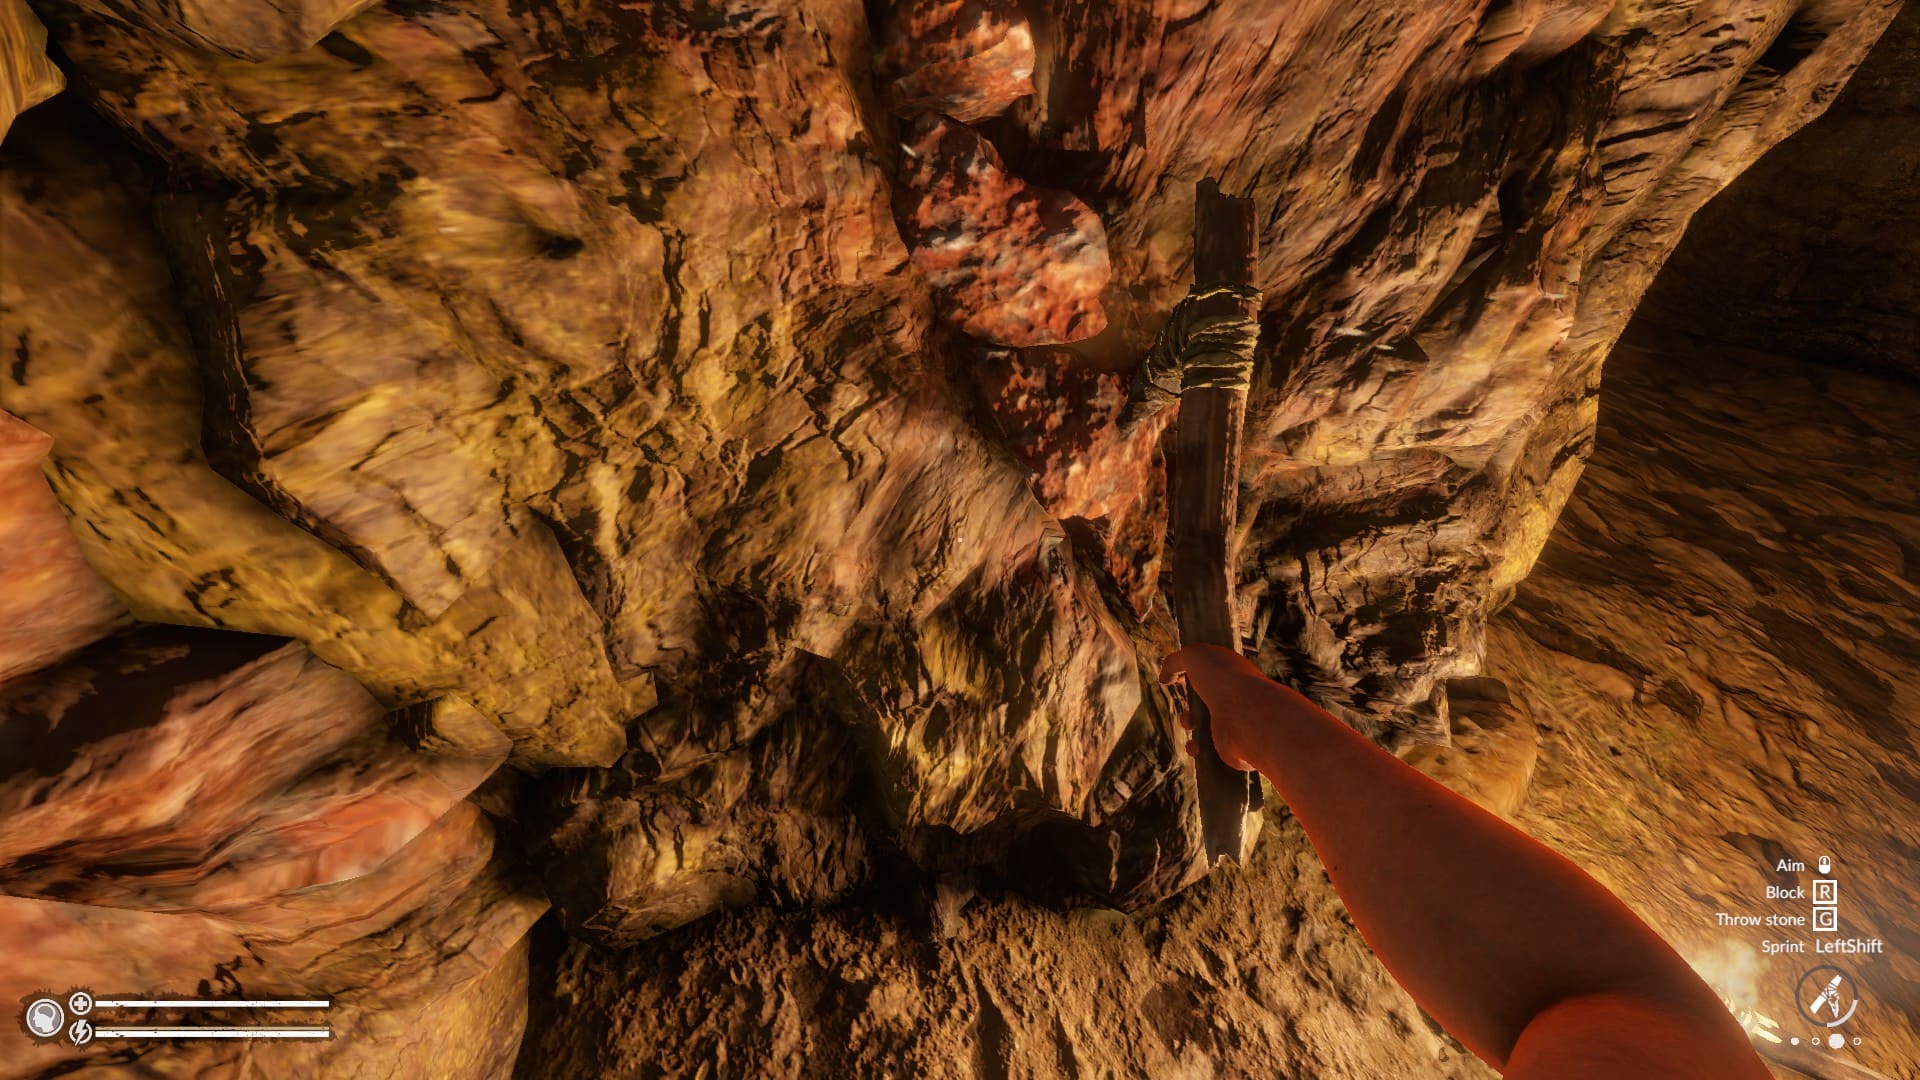 Using the Stone Pickaxe on an Ore Vein in Green Hell